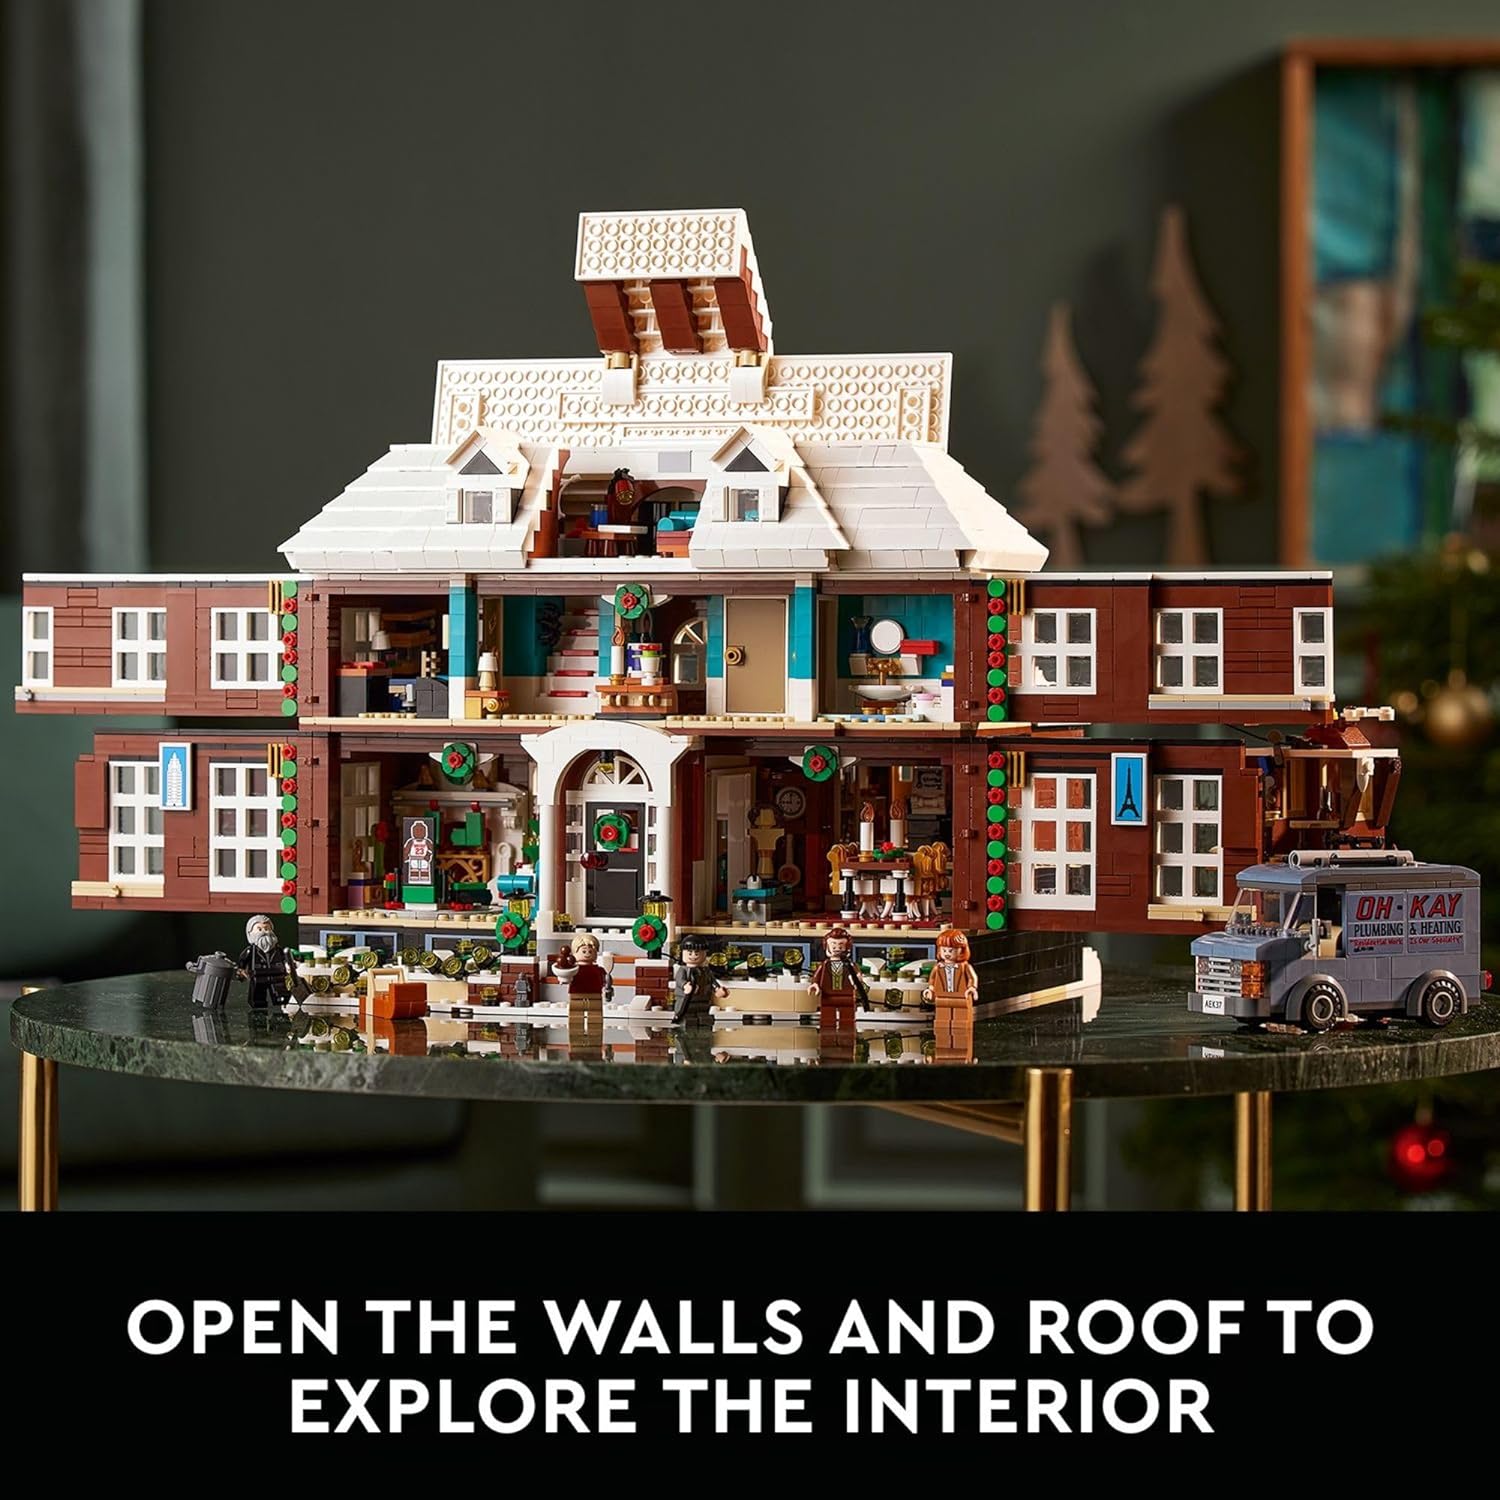 LEGO 21330  Ideas Home Alone McCallisters’ House Building Set for Adults, Movie Collectible Gift Idea with 5 Minifigures